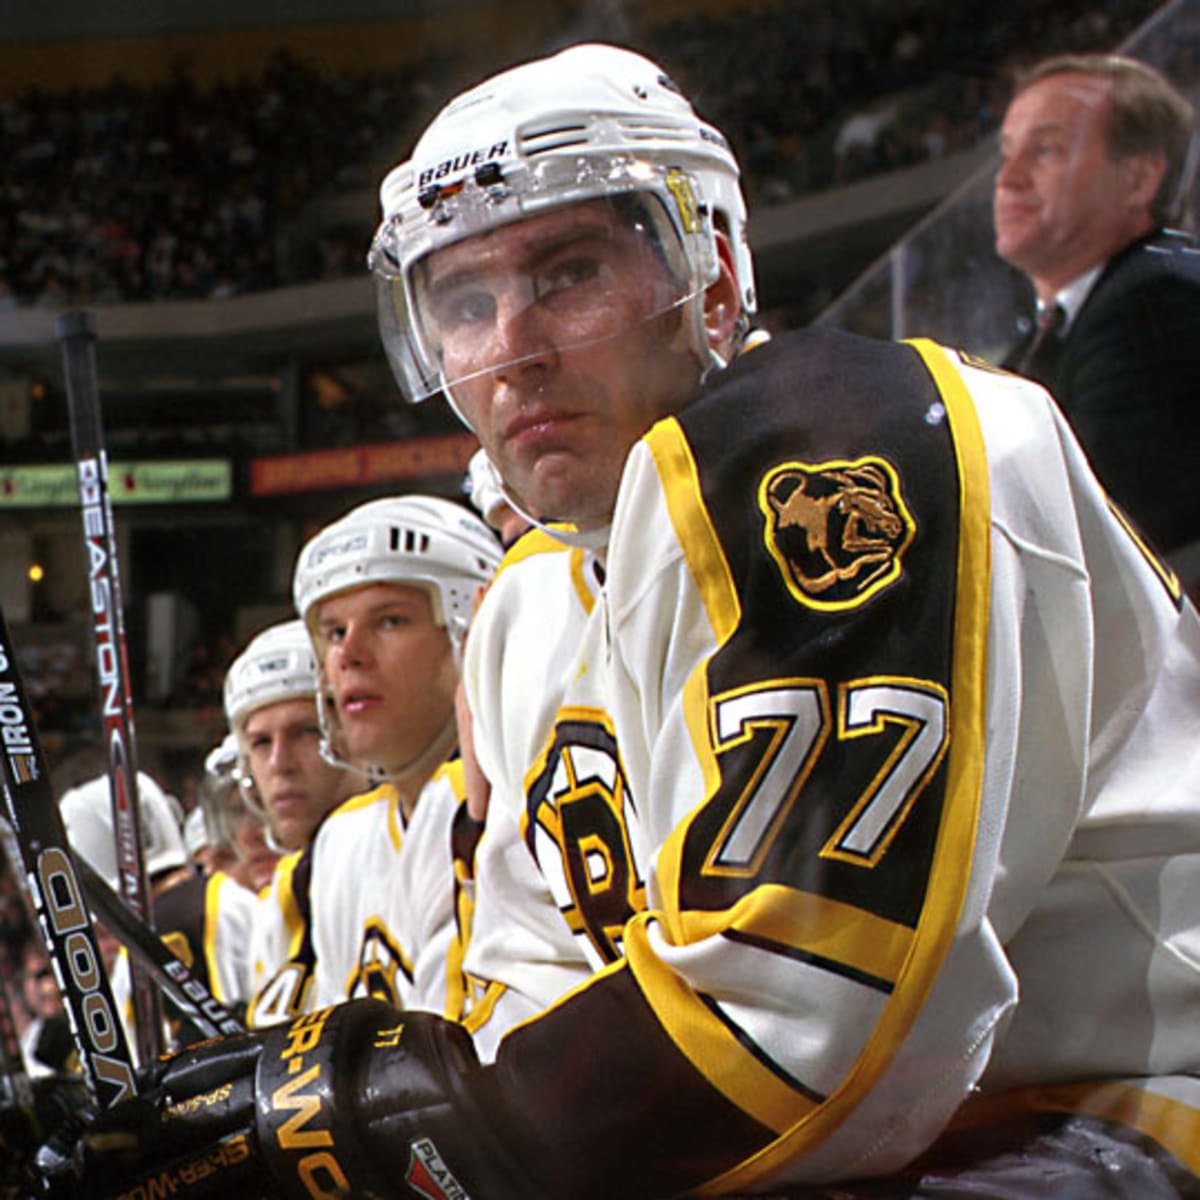 On this day in 2001: Bruins retire Ray Bourque's jersey